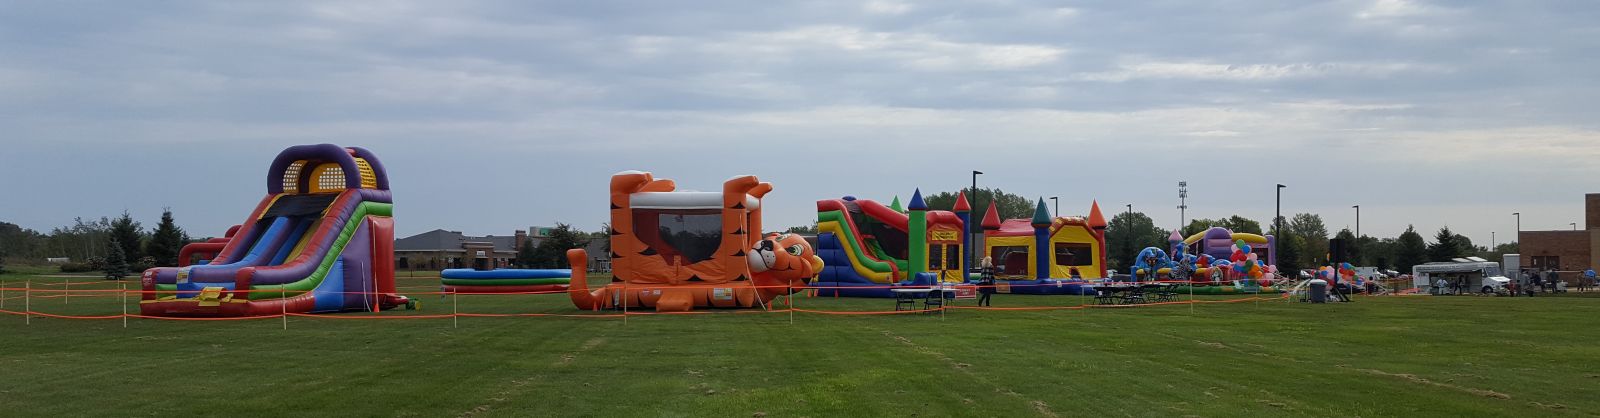 Tiger Belly Bouncer, GIANT Slide, Combo, and other inflatables at a church event.